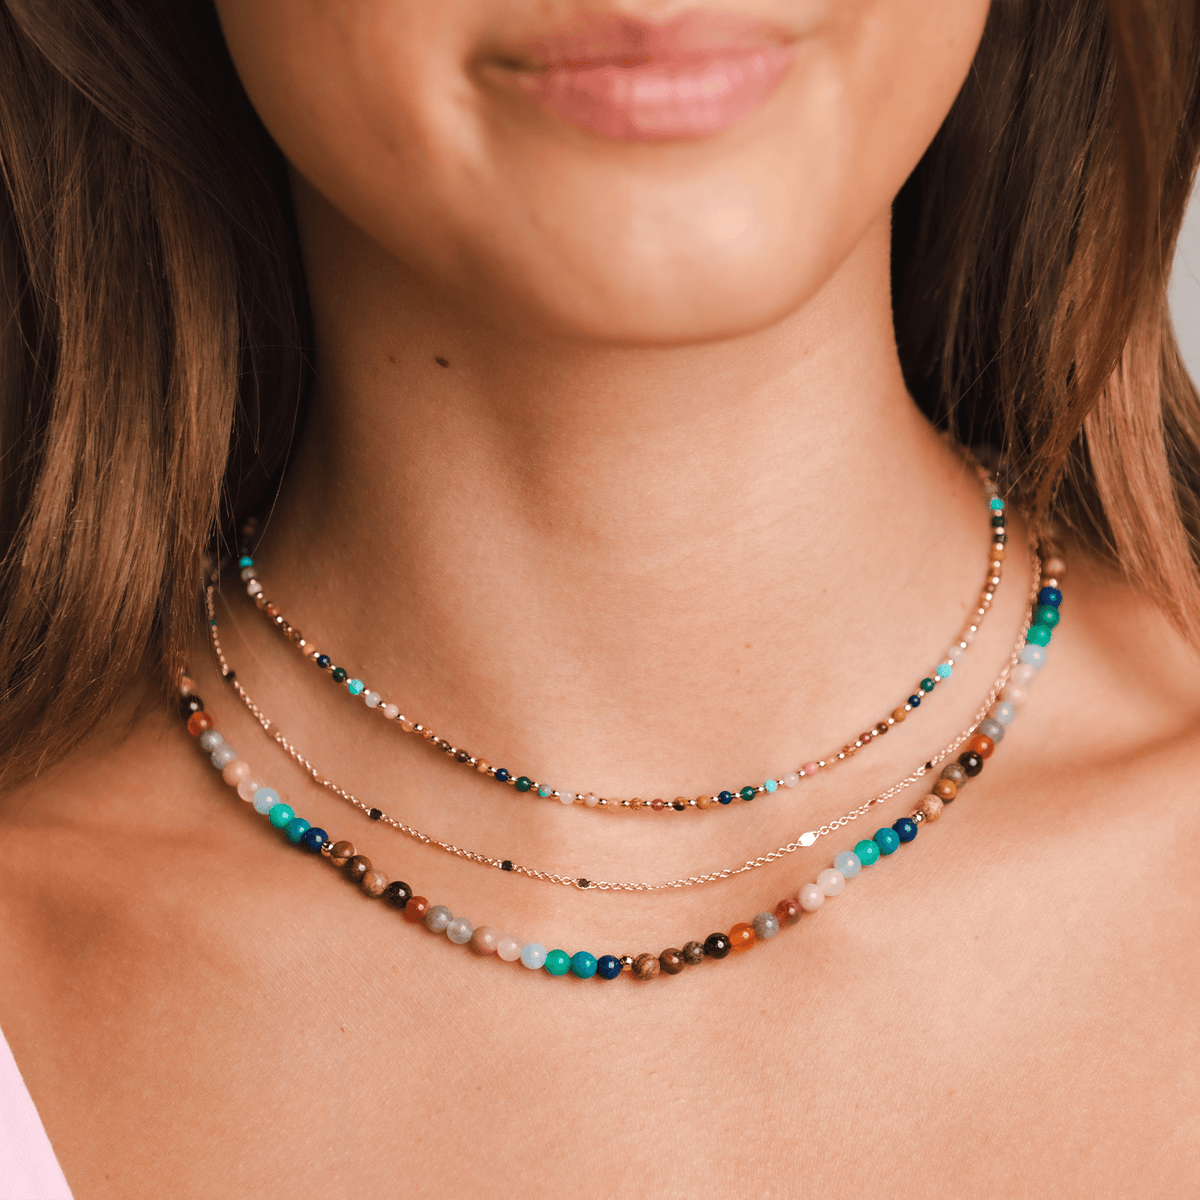 Model is wearing a stack of three necklaces. One is a 4mm multicolor stone necklace, the other is a dainty gold chain necklace and the last one is a dainty 2mm multicolor stone and gold bead necklace